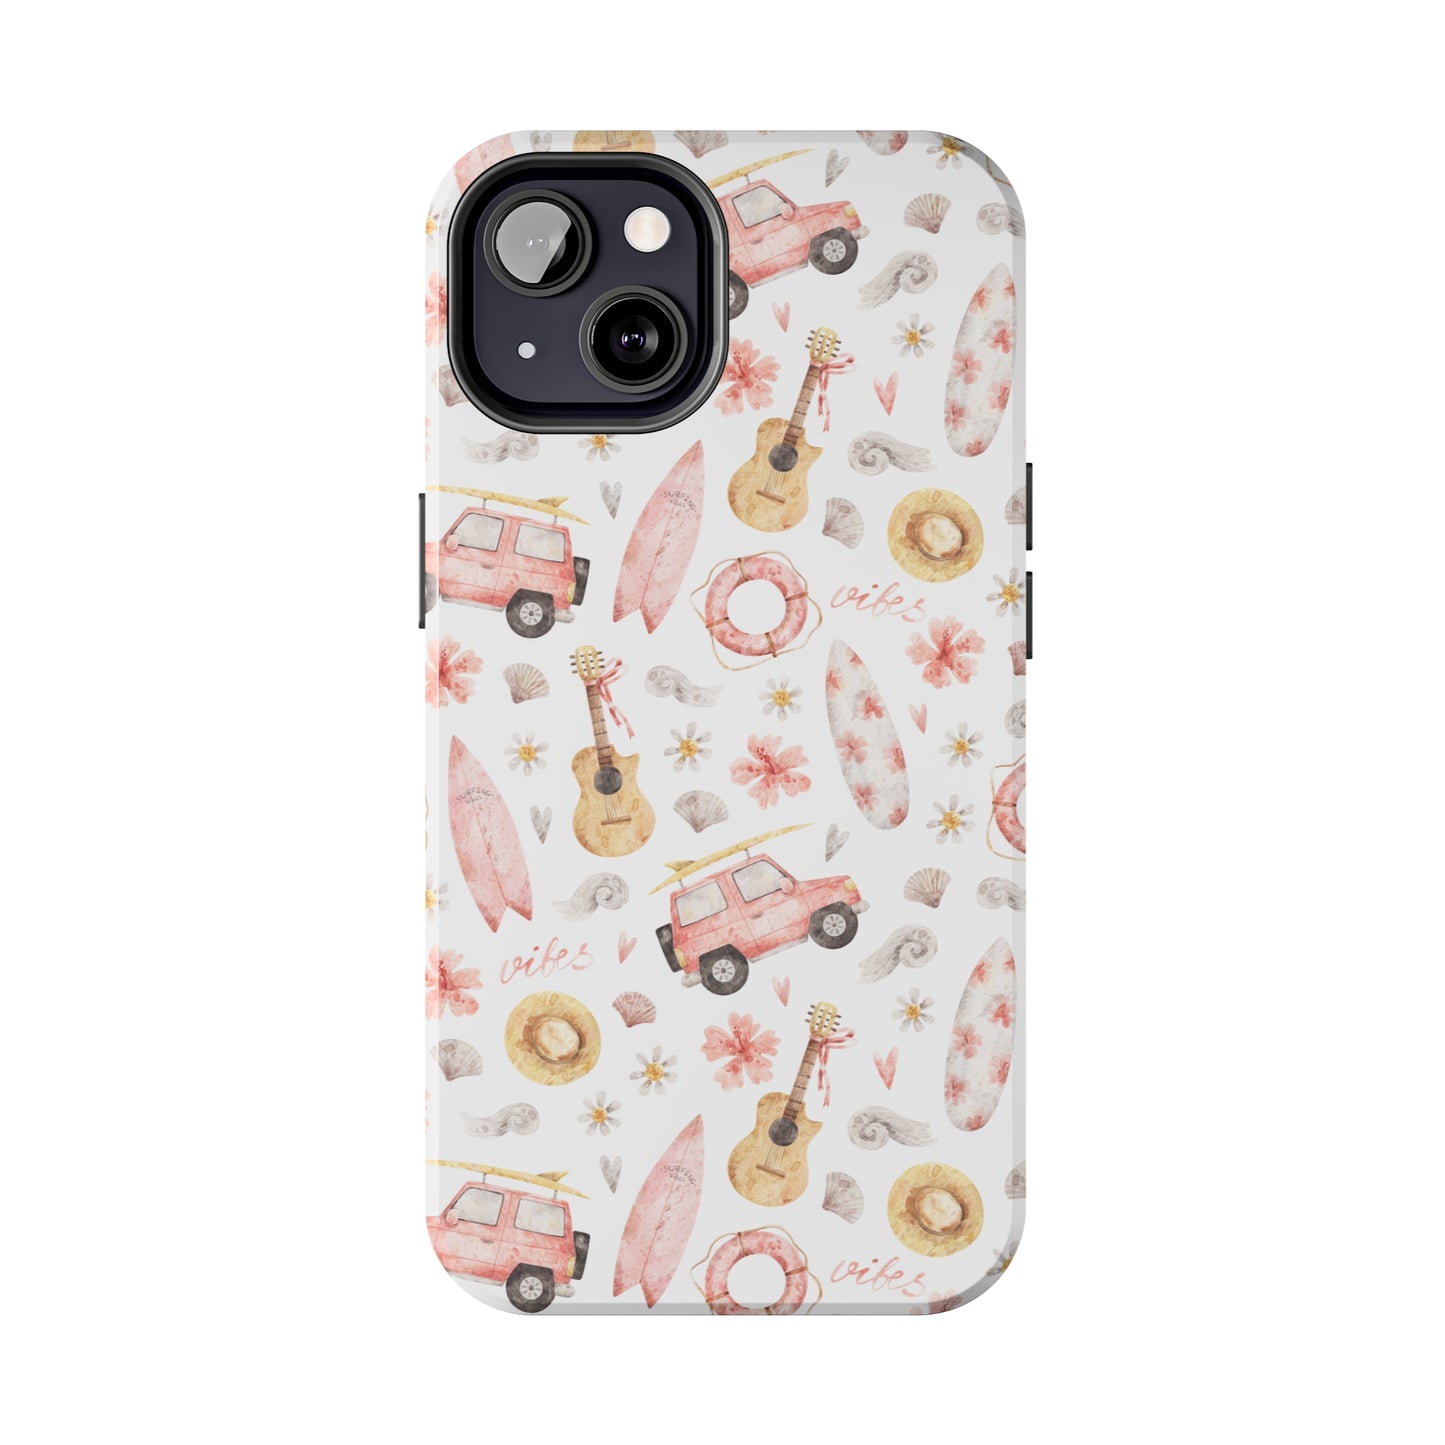 Beachside Vibes - Phone Case For